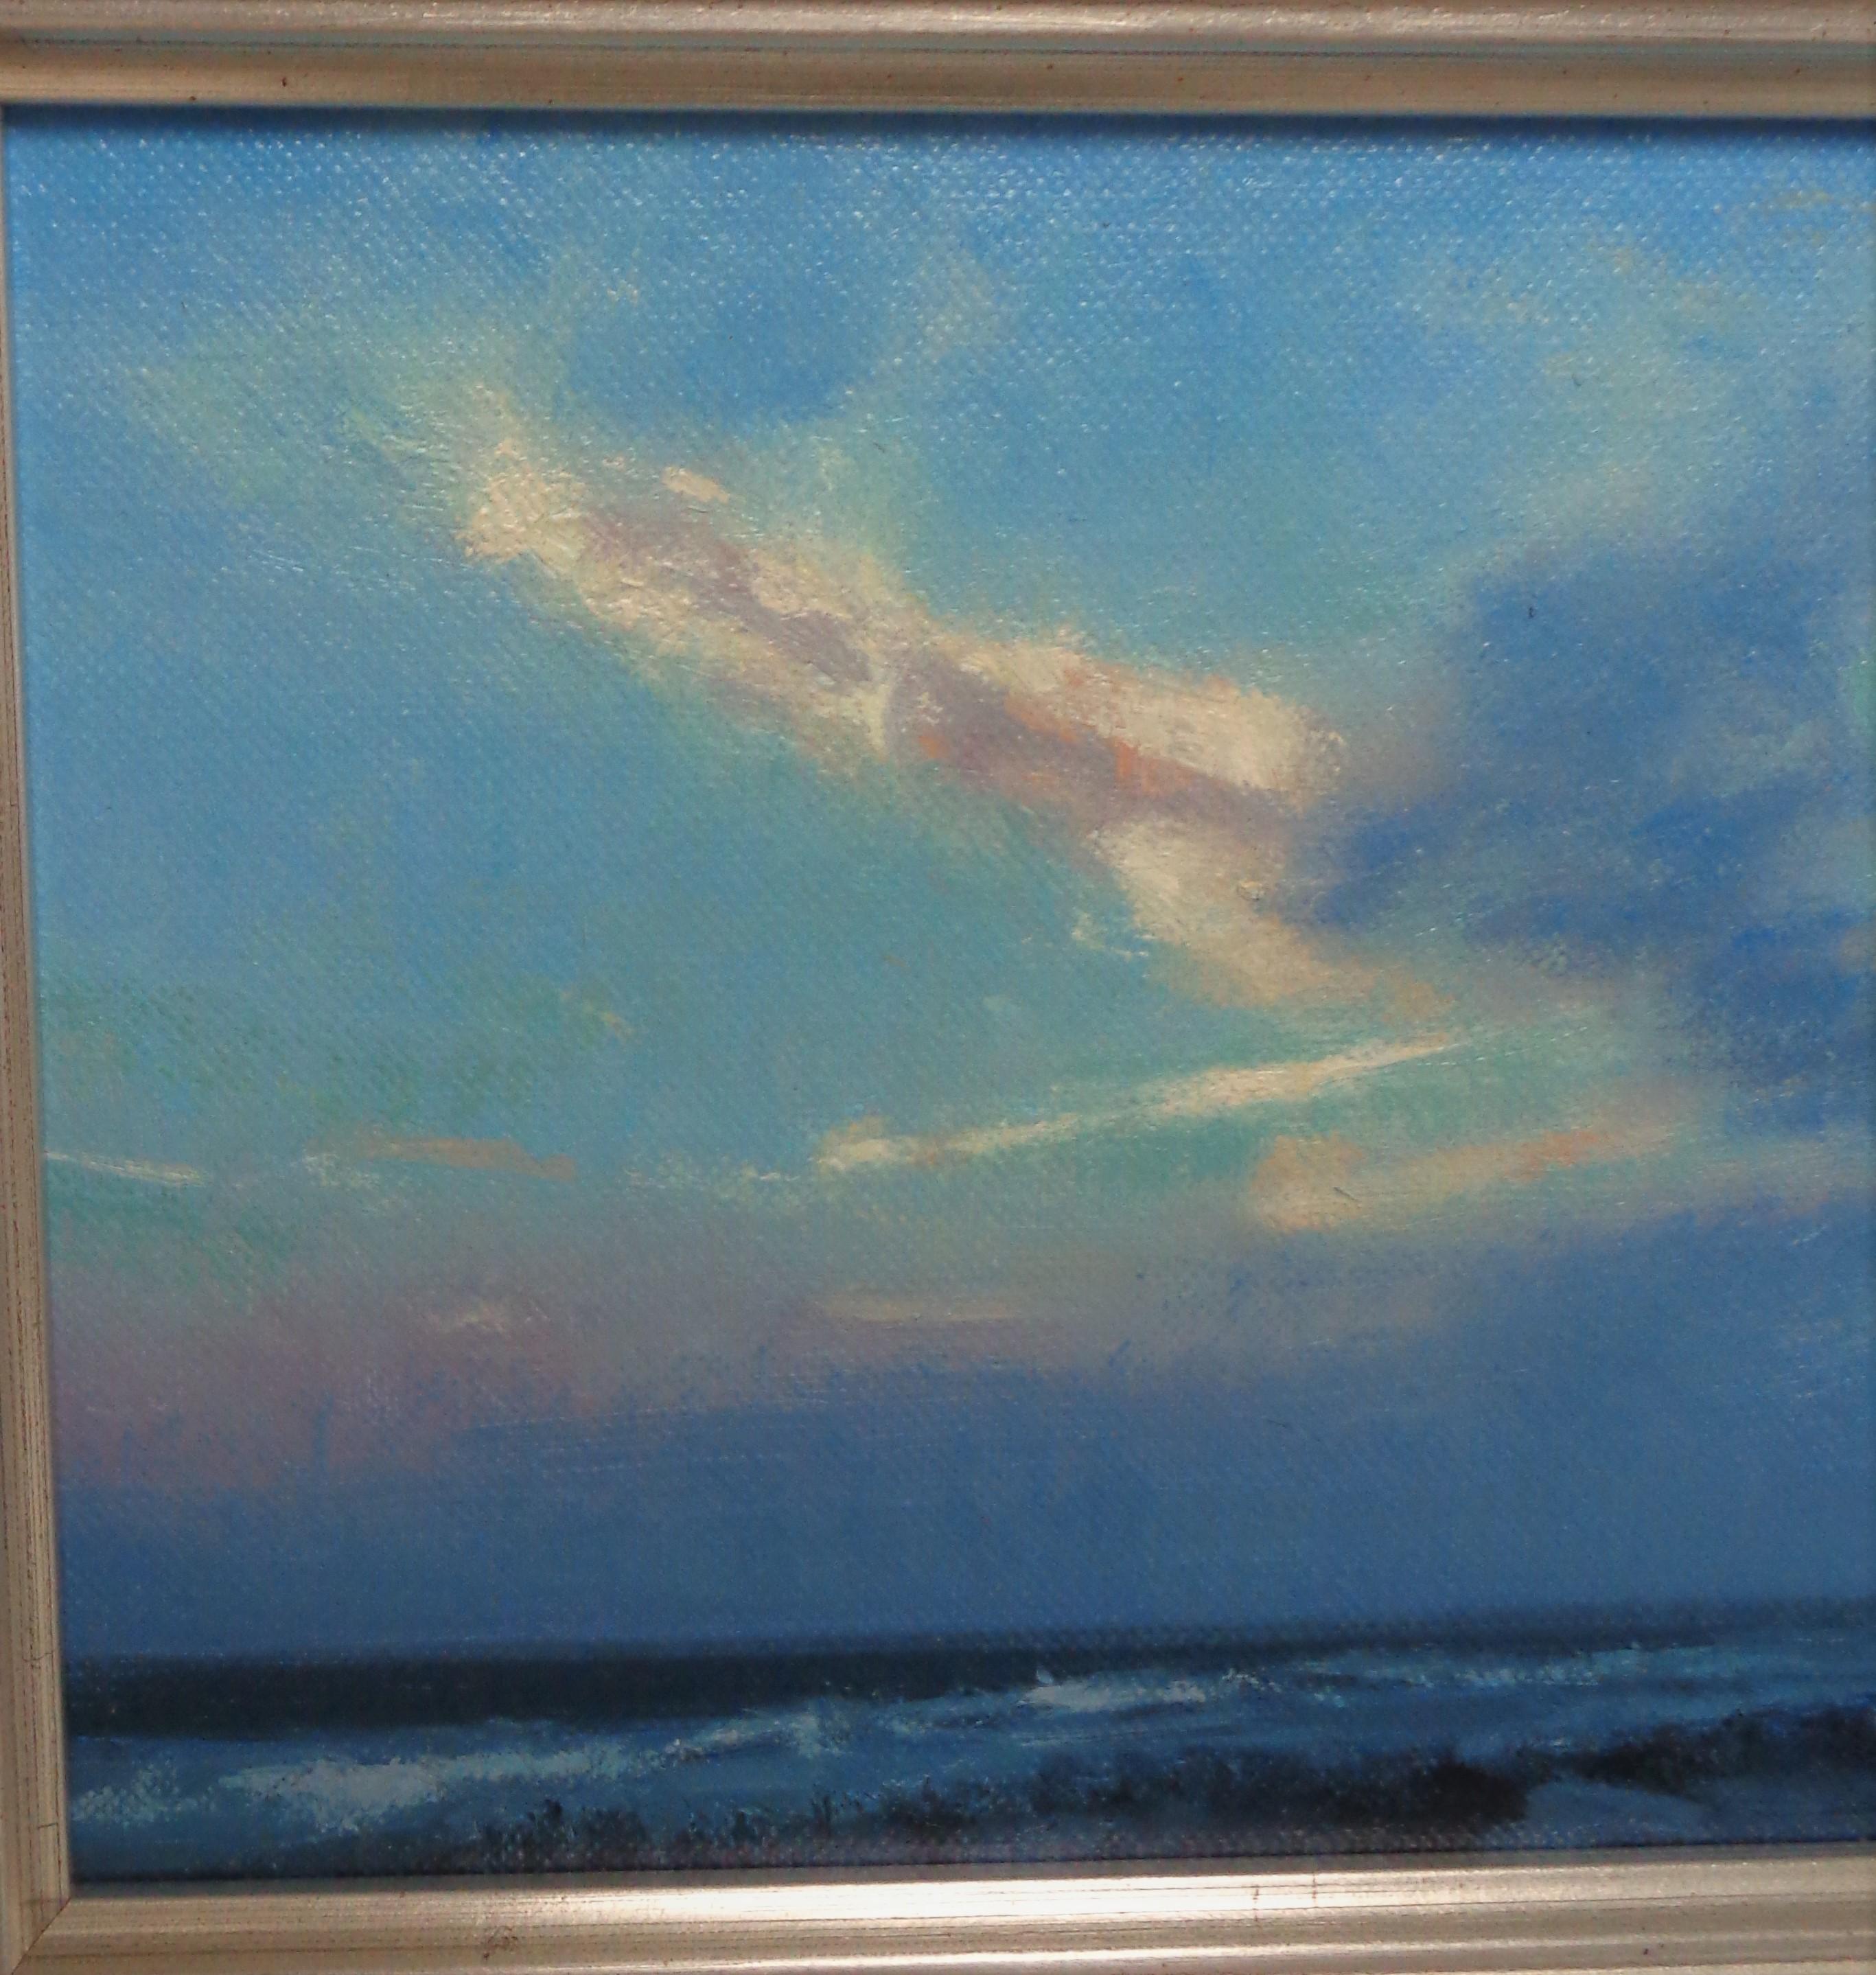  Realistic Seascape Study Oil Painting Michael Budden Sunset Study 2